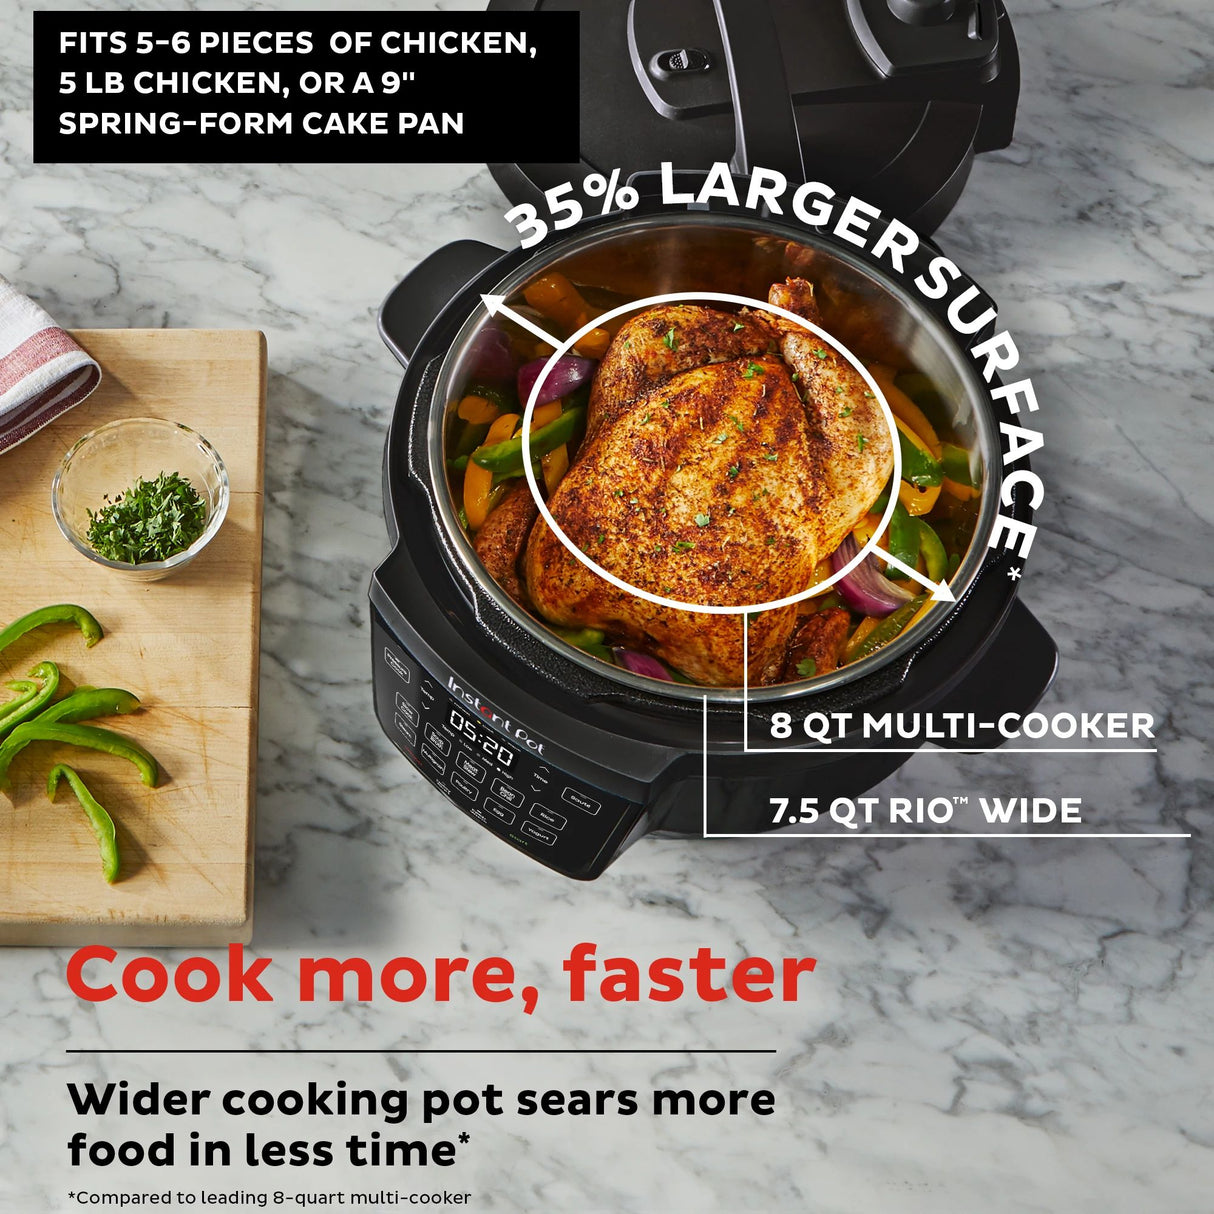  Instant Pot RIO Wide 7.5-quart Multicooker on the counter with text in photo cook more, faster, 35% larger surface